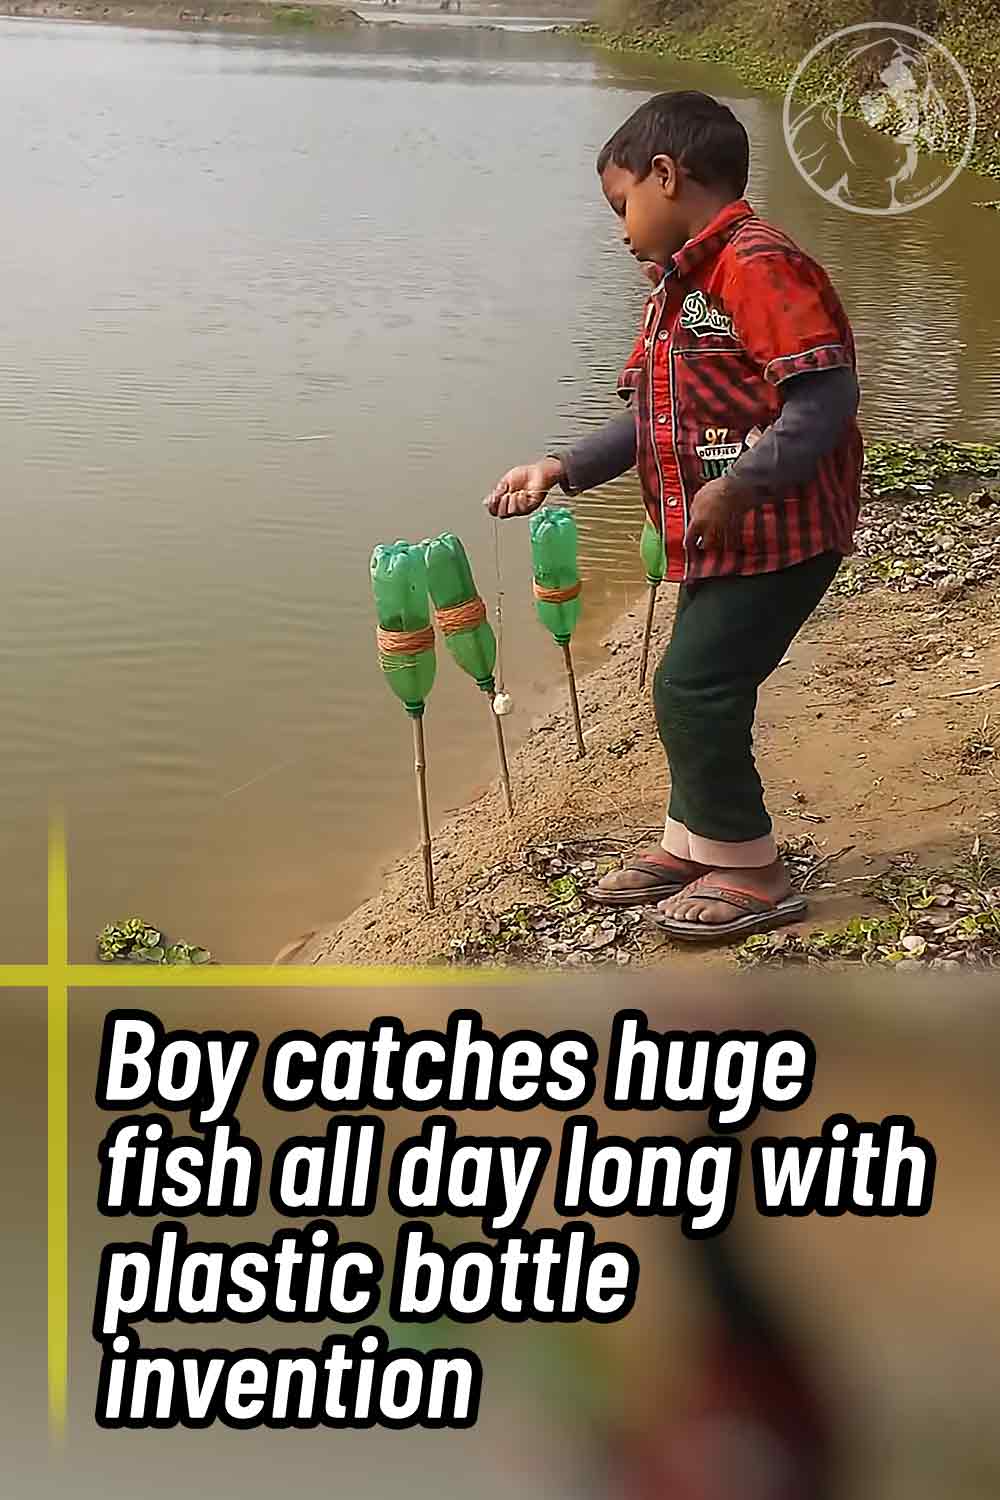 Boy catches huge fish all day long with plastic bottle invention